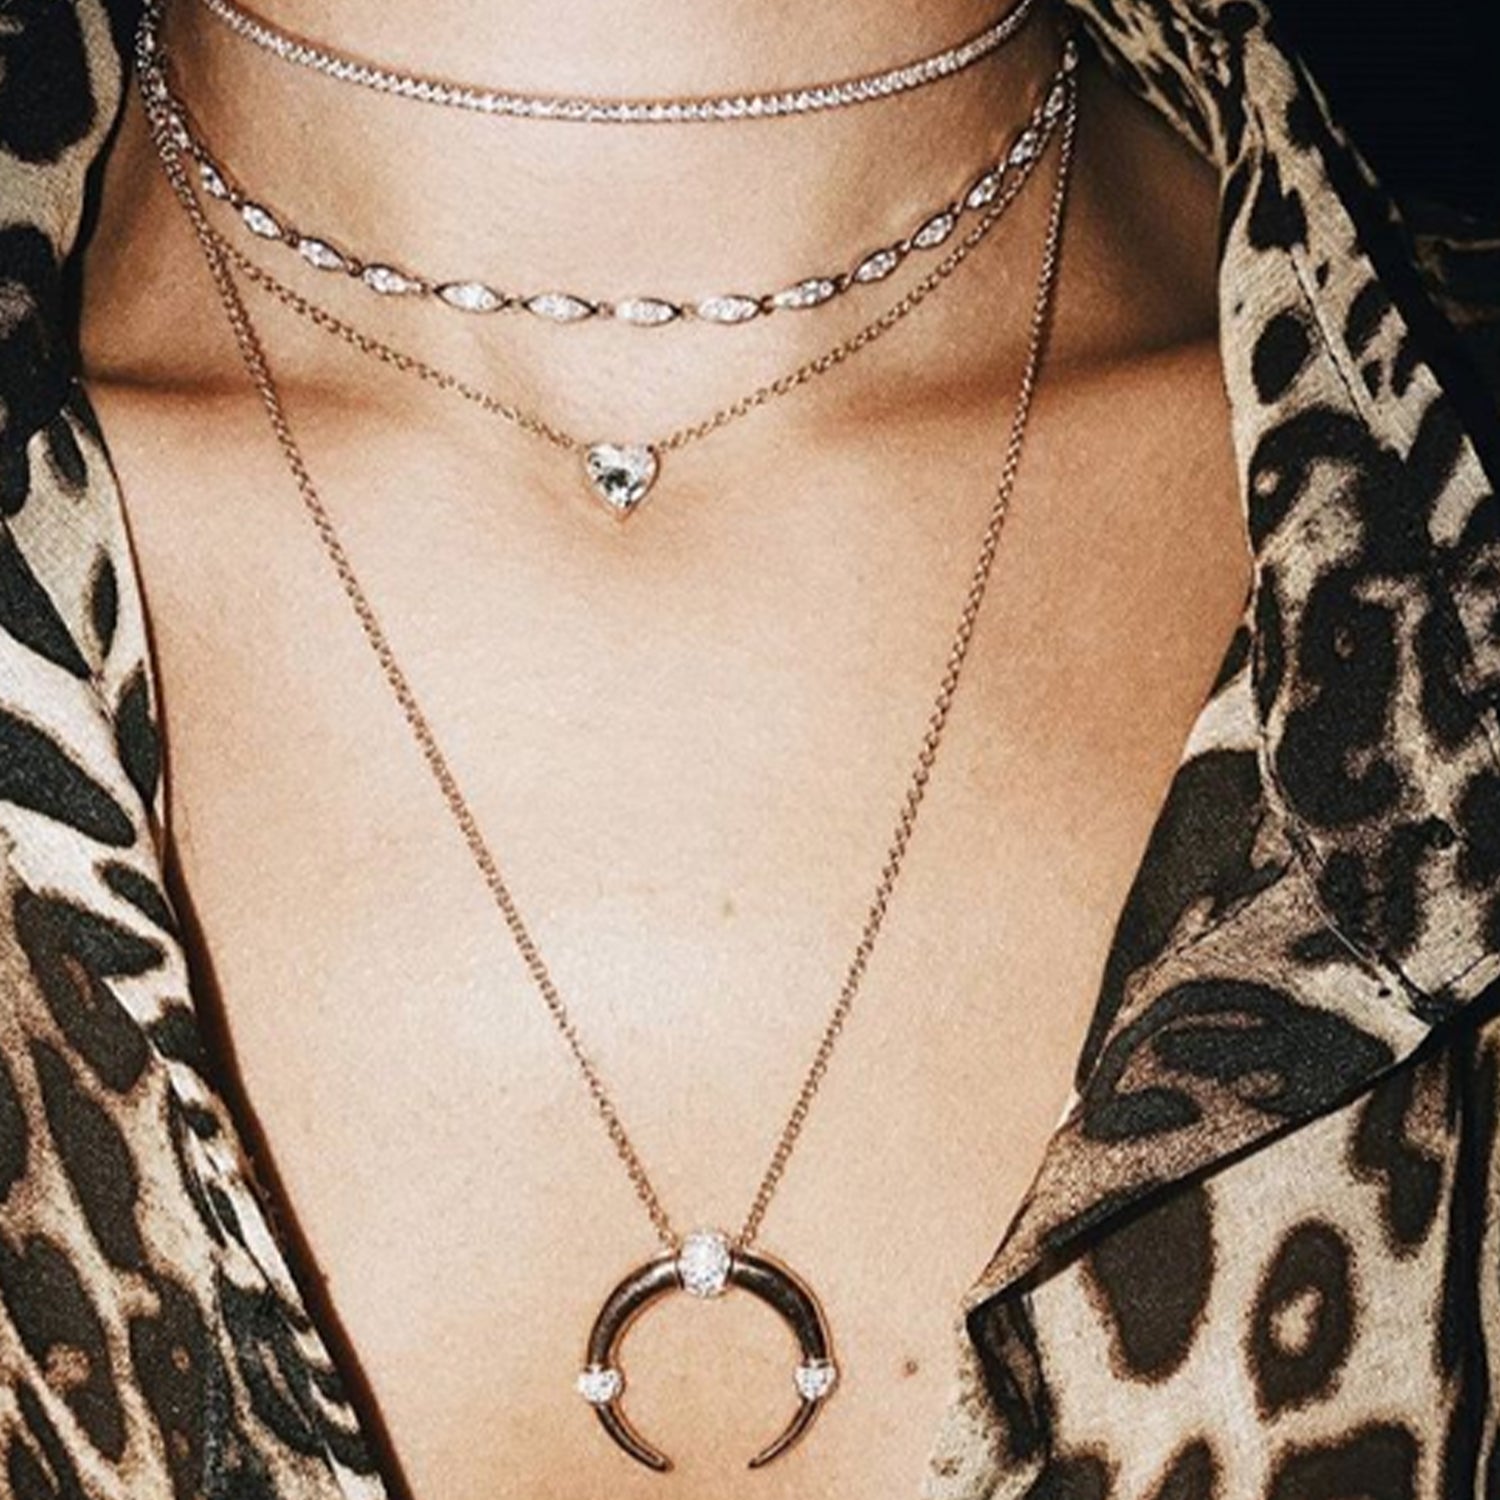 The Floating Heart Necklace shown layered with the Infinity Choker, Angel Choker, and Dharma Necklace.